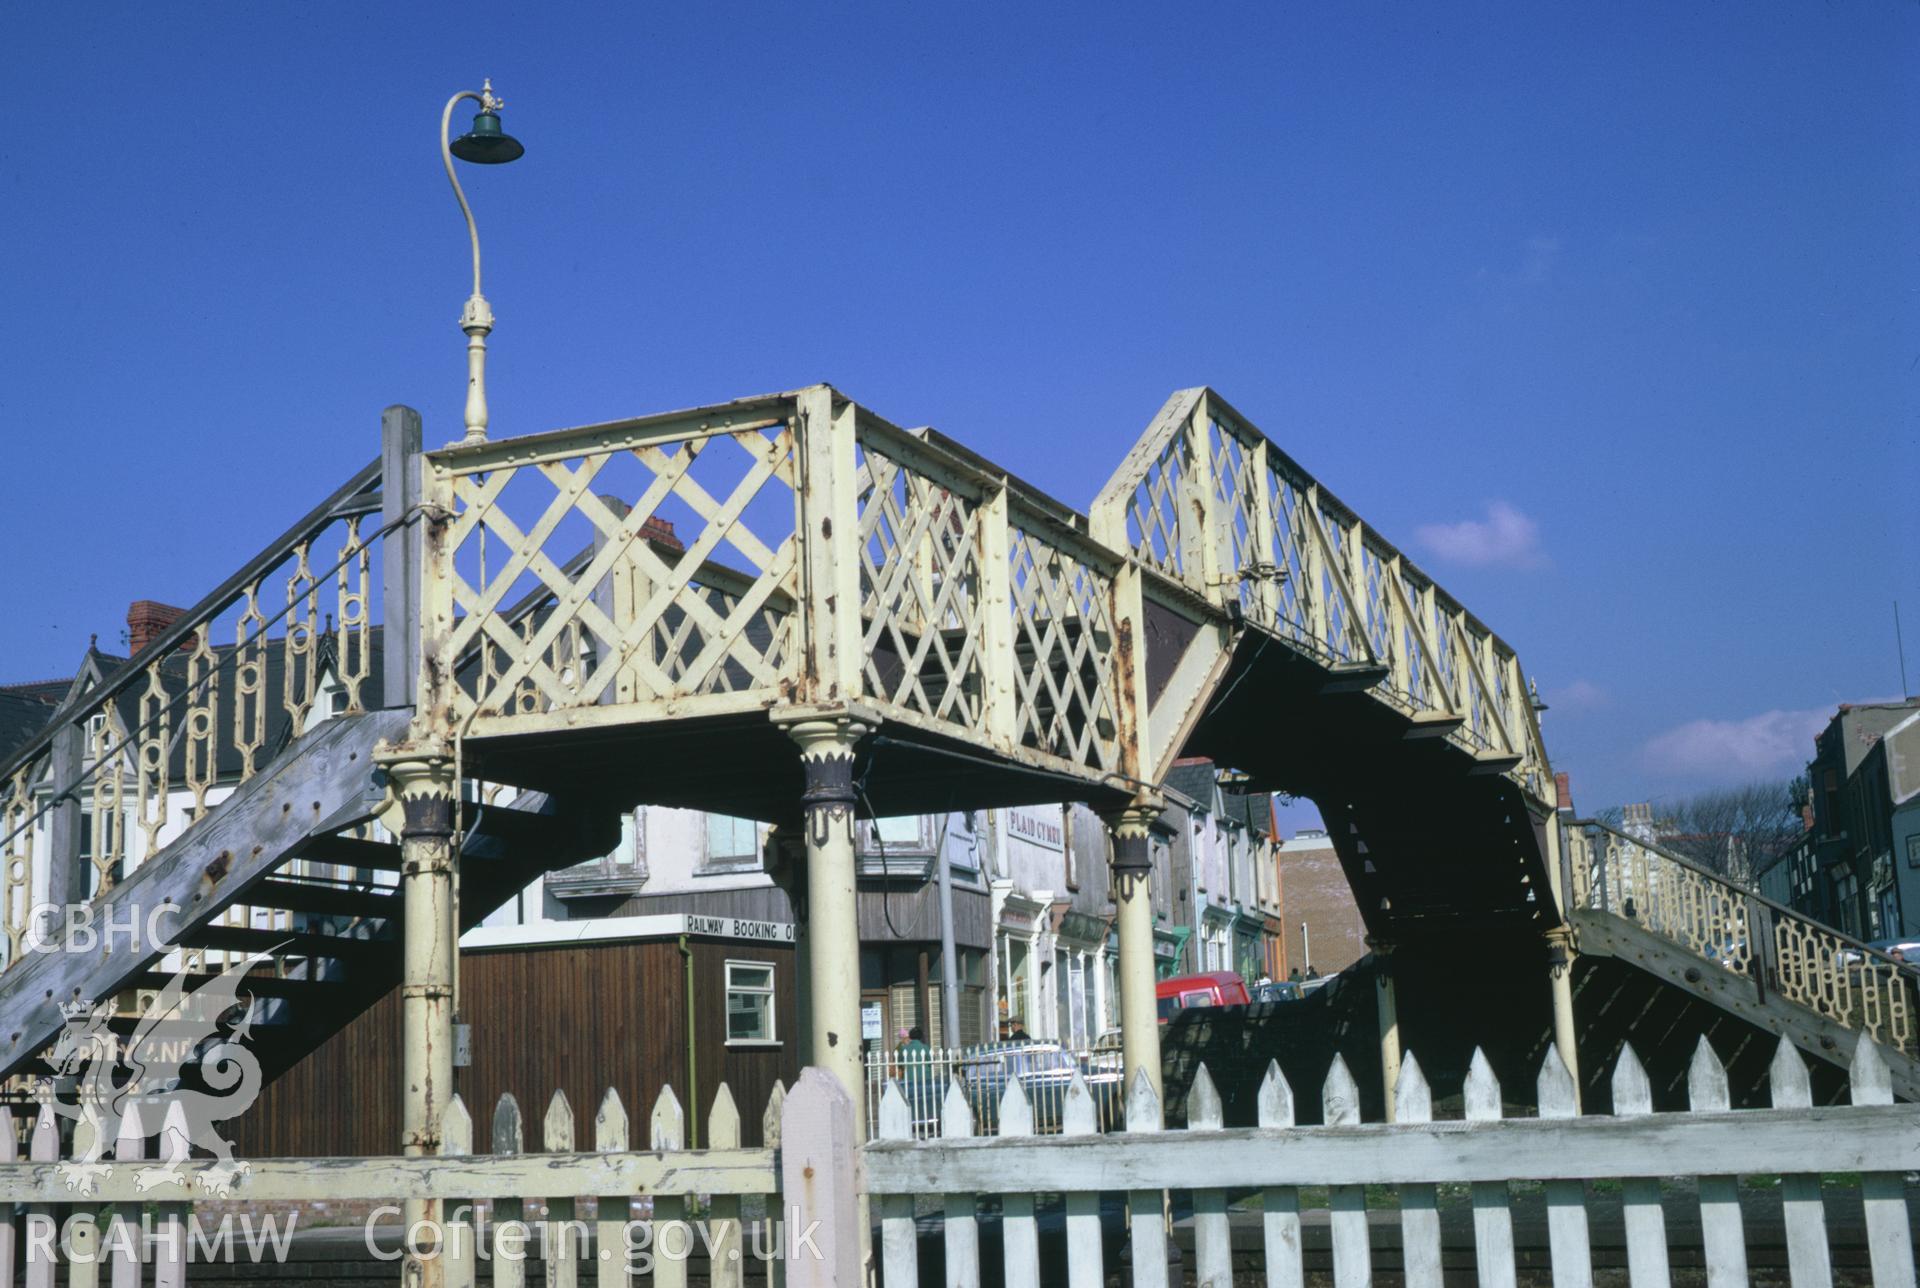 35mm colour slide showing the foot bridge at Burry Port Station, Carmarthenshire by Dylan Roberts.